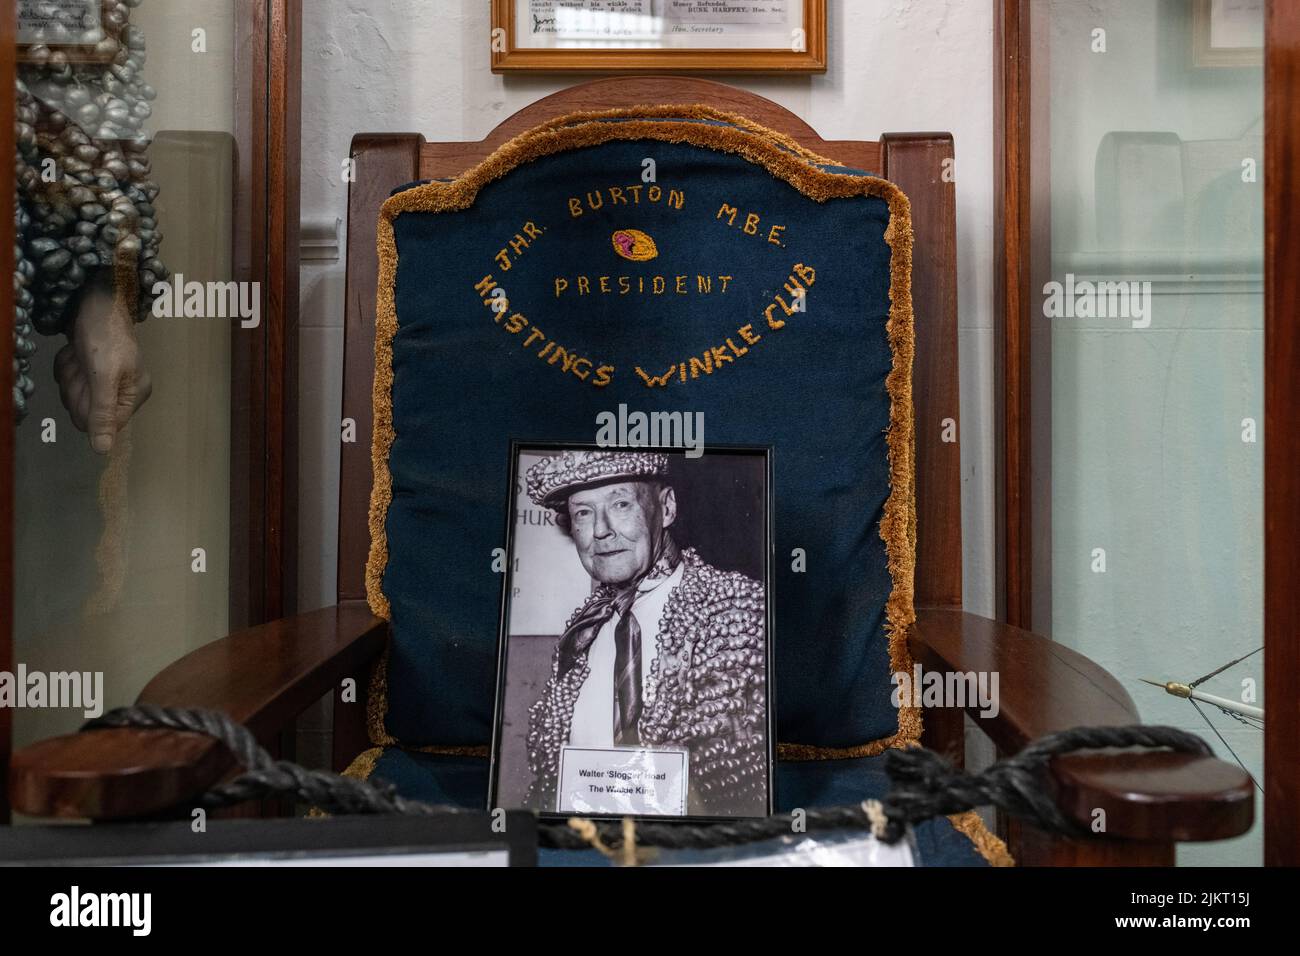 Il Winkle King of Hastings Winkle Club - Walker 'Slogger' Hoad - esposizione in Hastings Fishermens Museum, Hastings, East Sussex, Inghilterra, Regno Unito Foto Stock